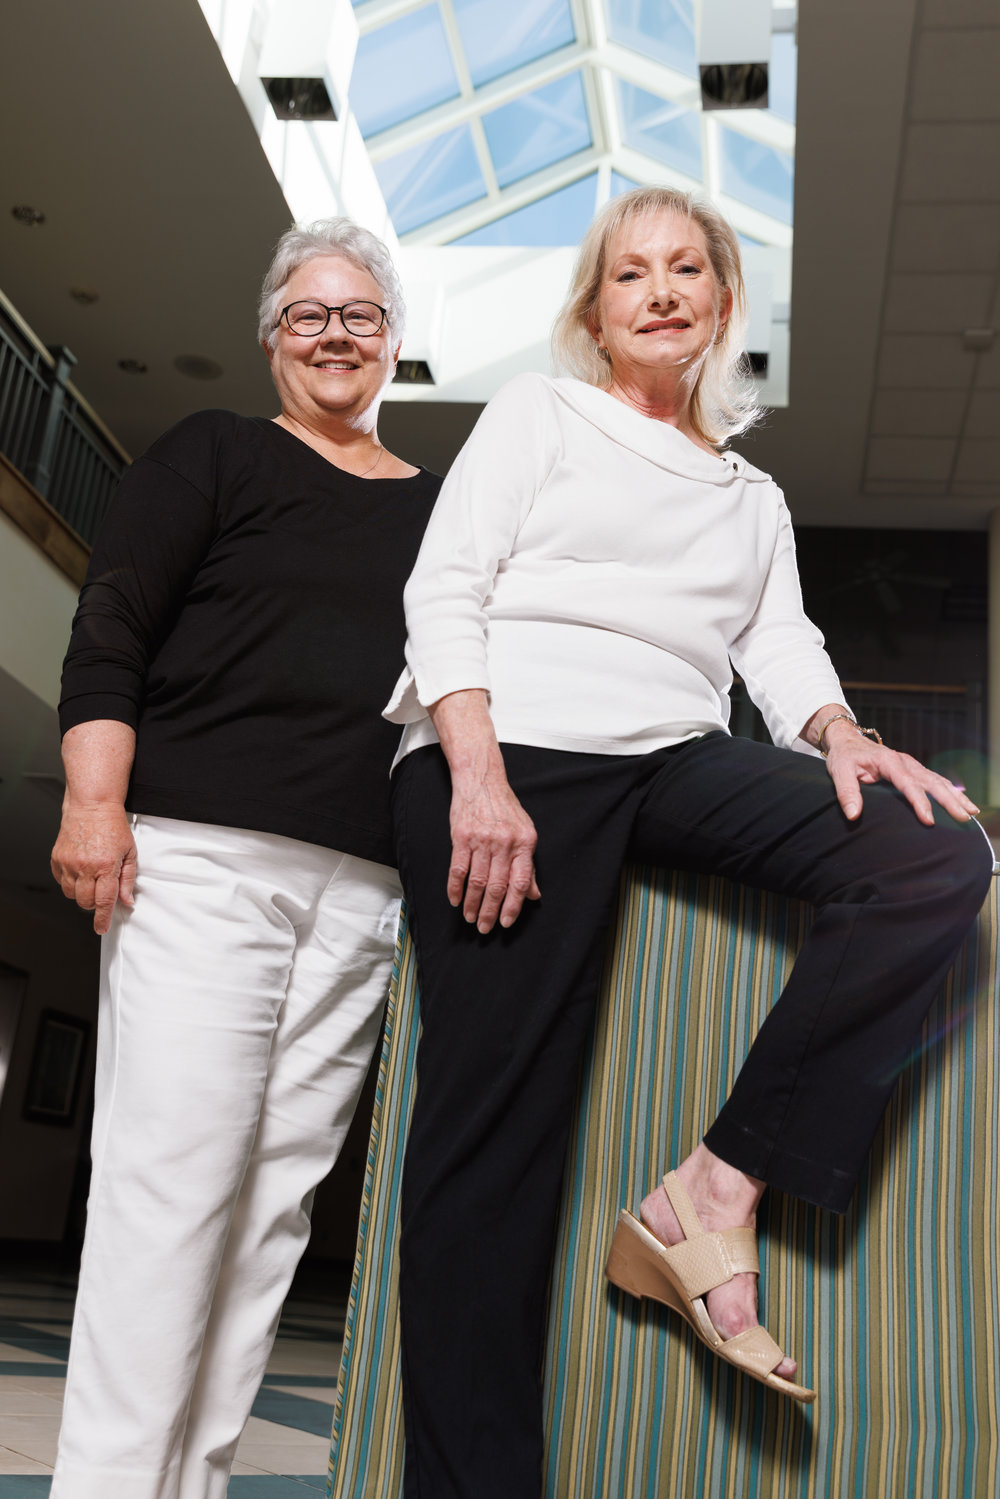 Donna Oswalt and Kathy McPhail are sharing the same experience through the Cancer Center at Cape Fear Valley.